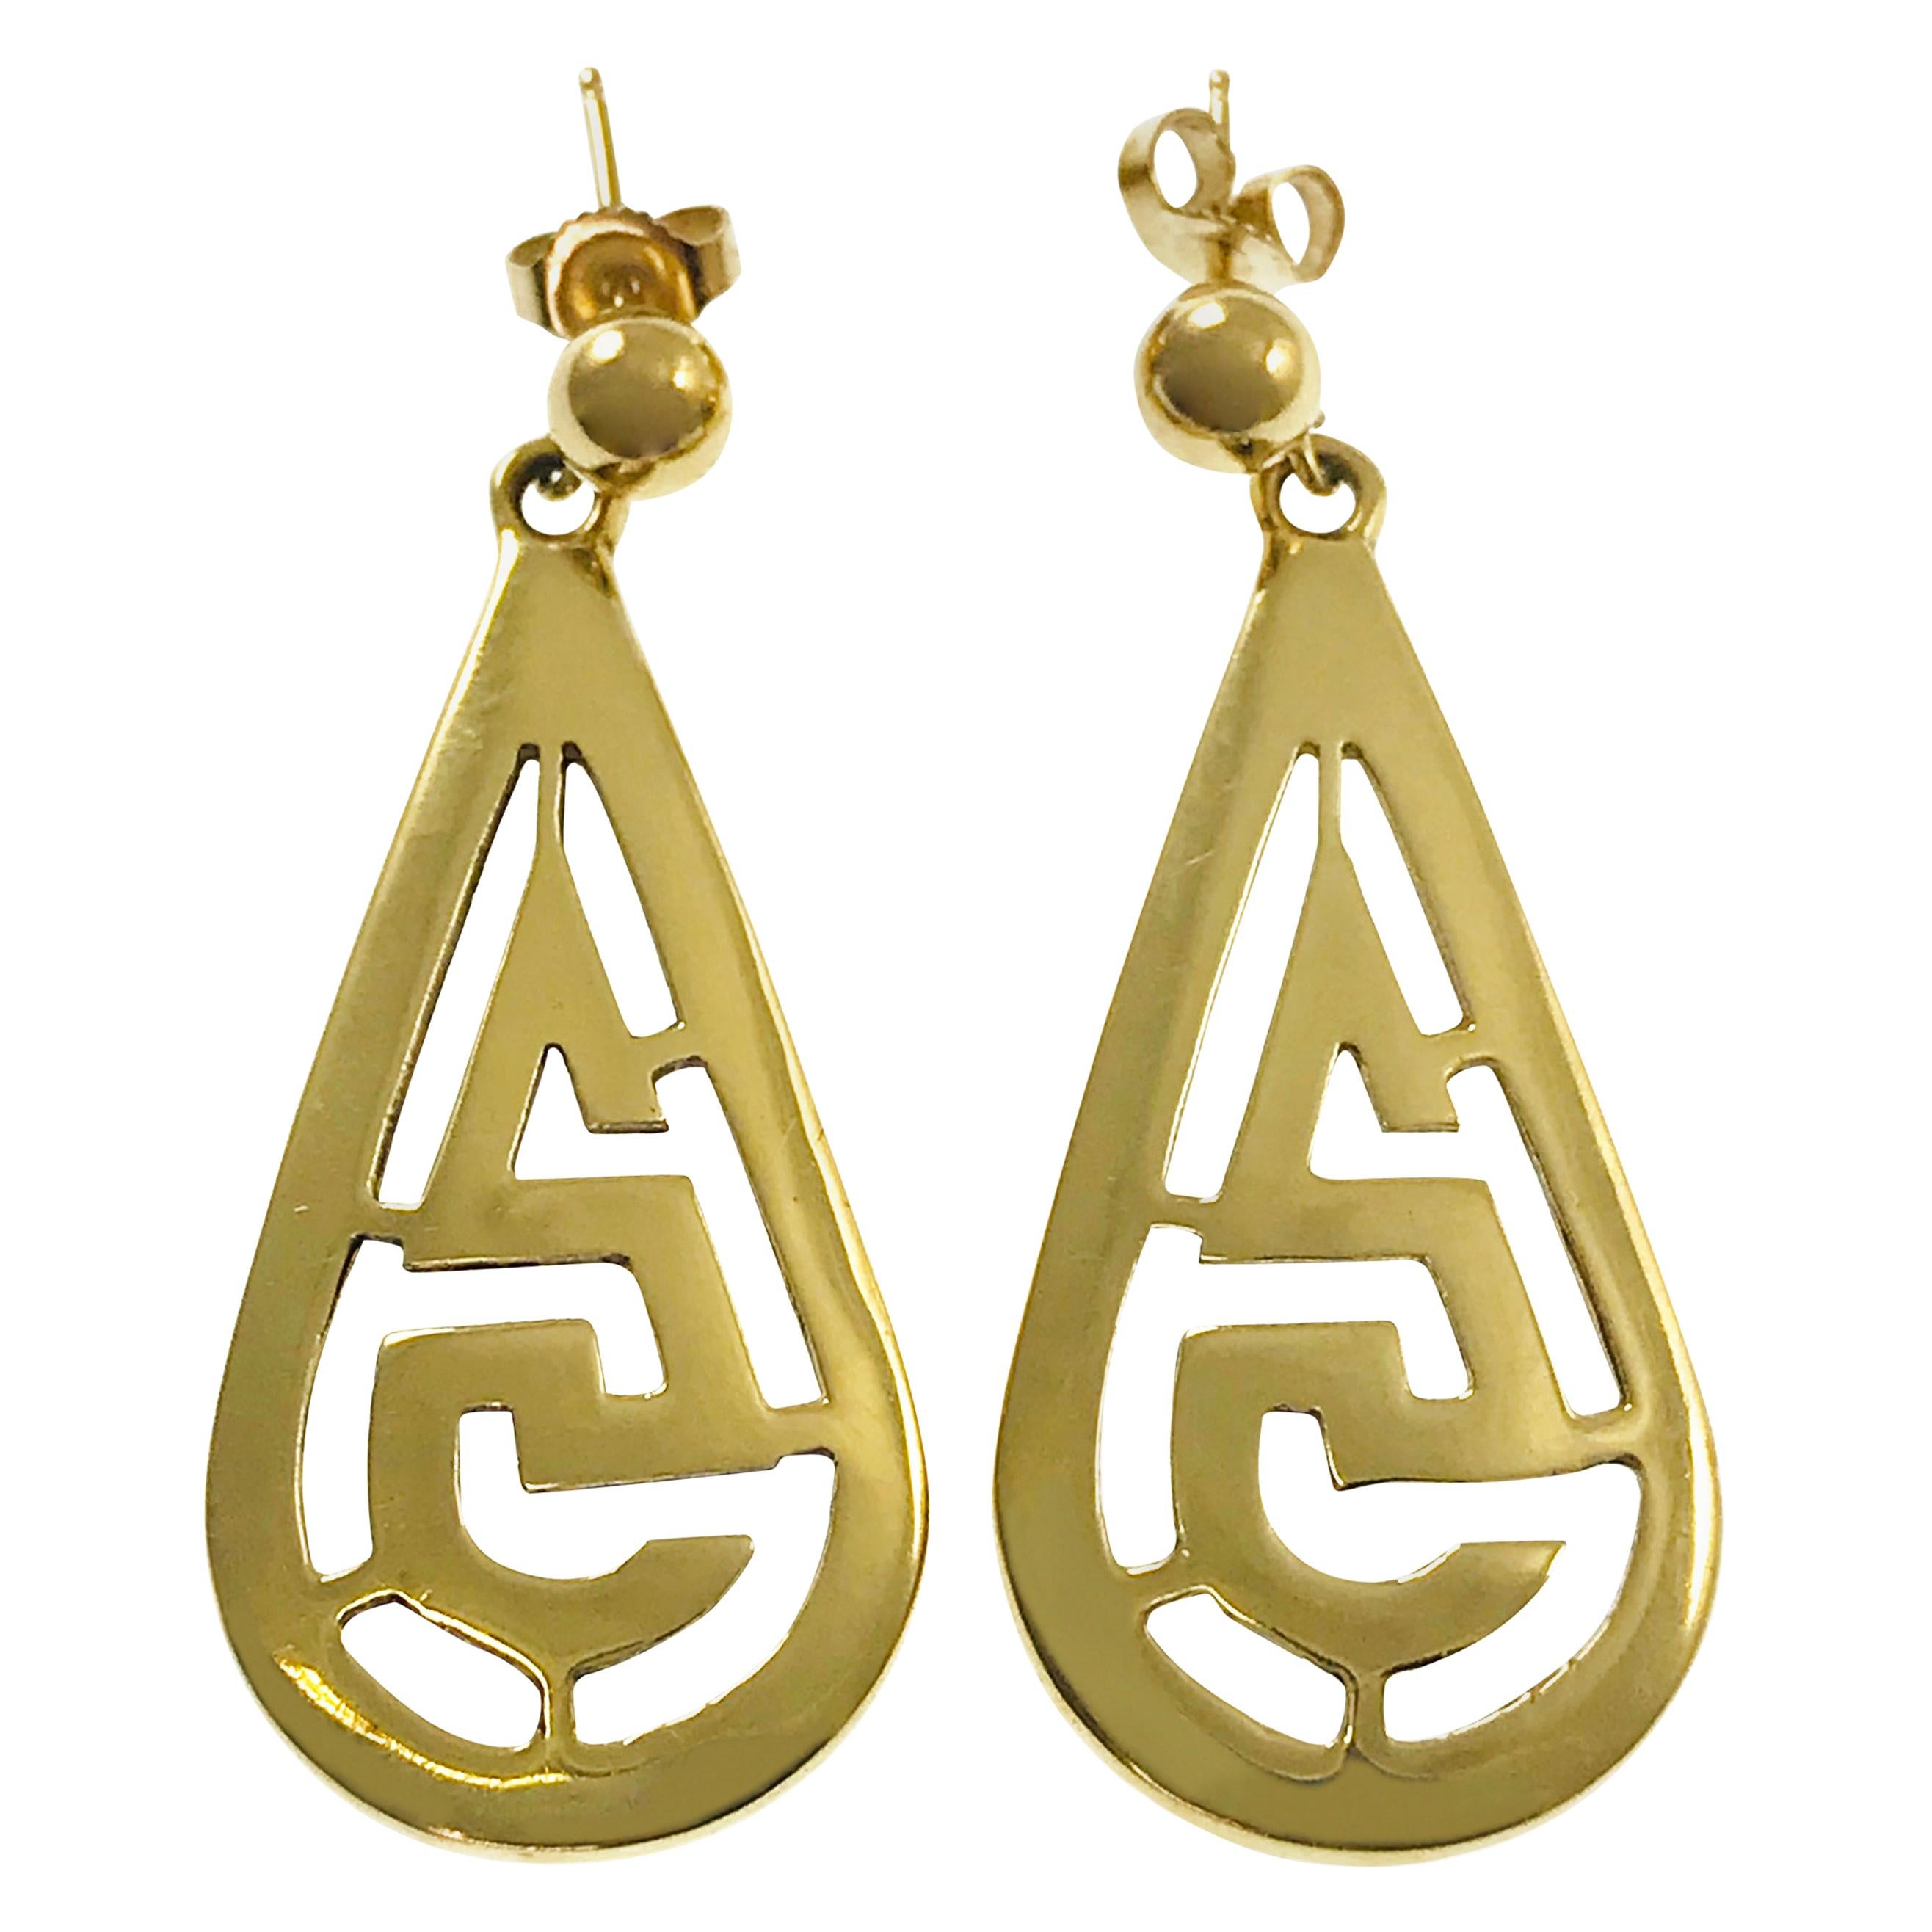 14K Two-Tone Gold Polished and Textured Dangle Leverback Earrings Approximately 41mm x 7mm